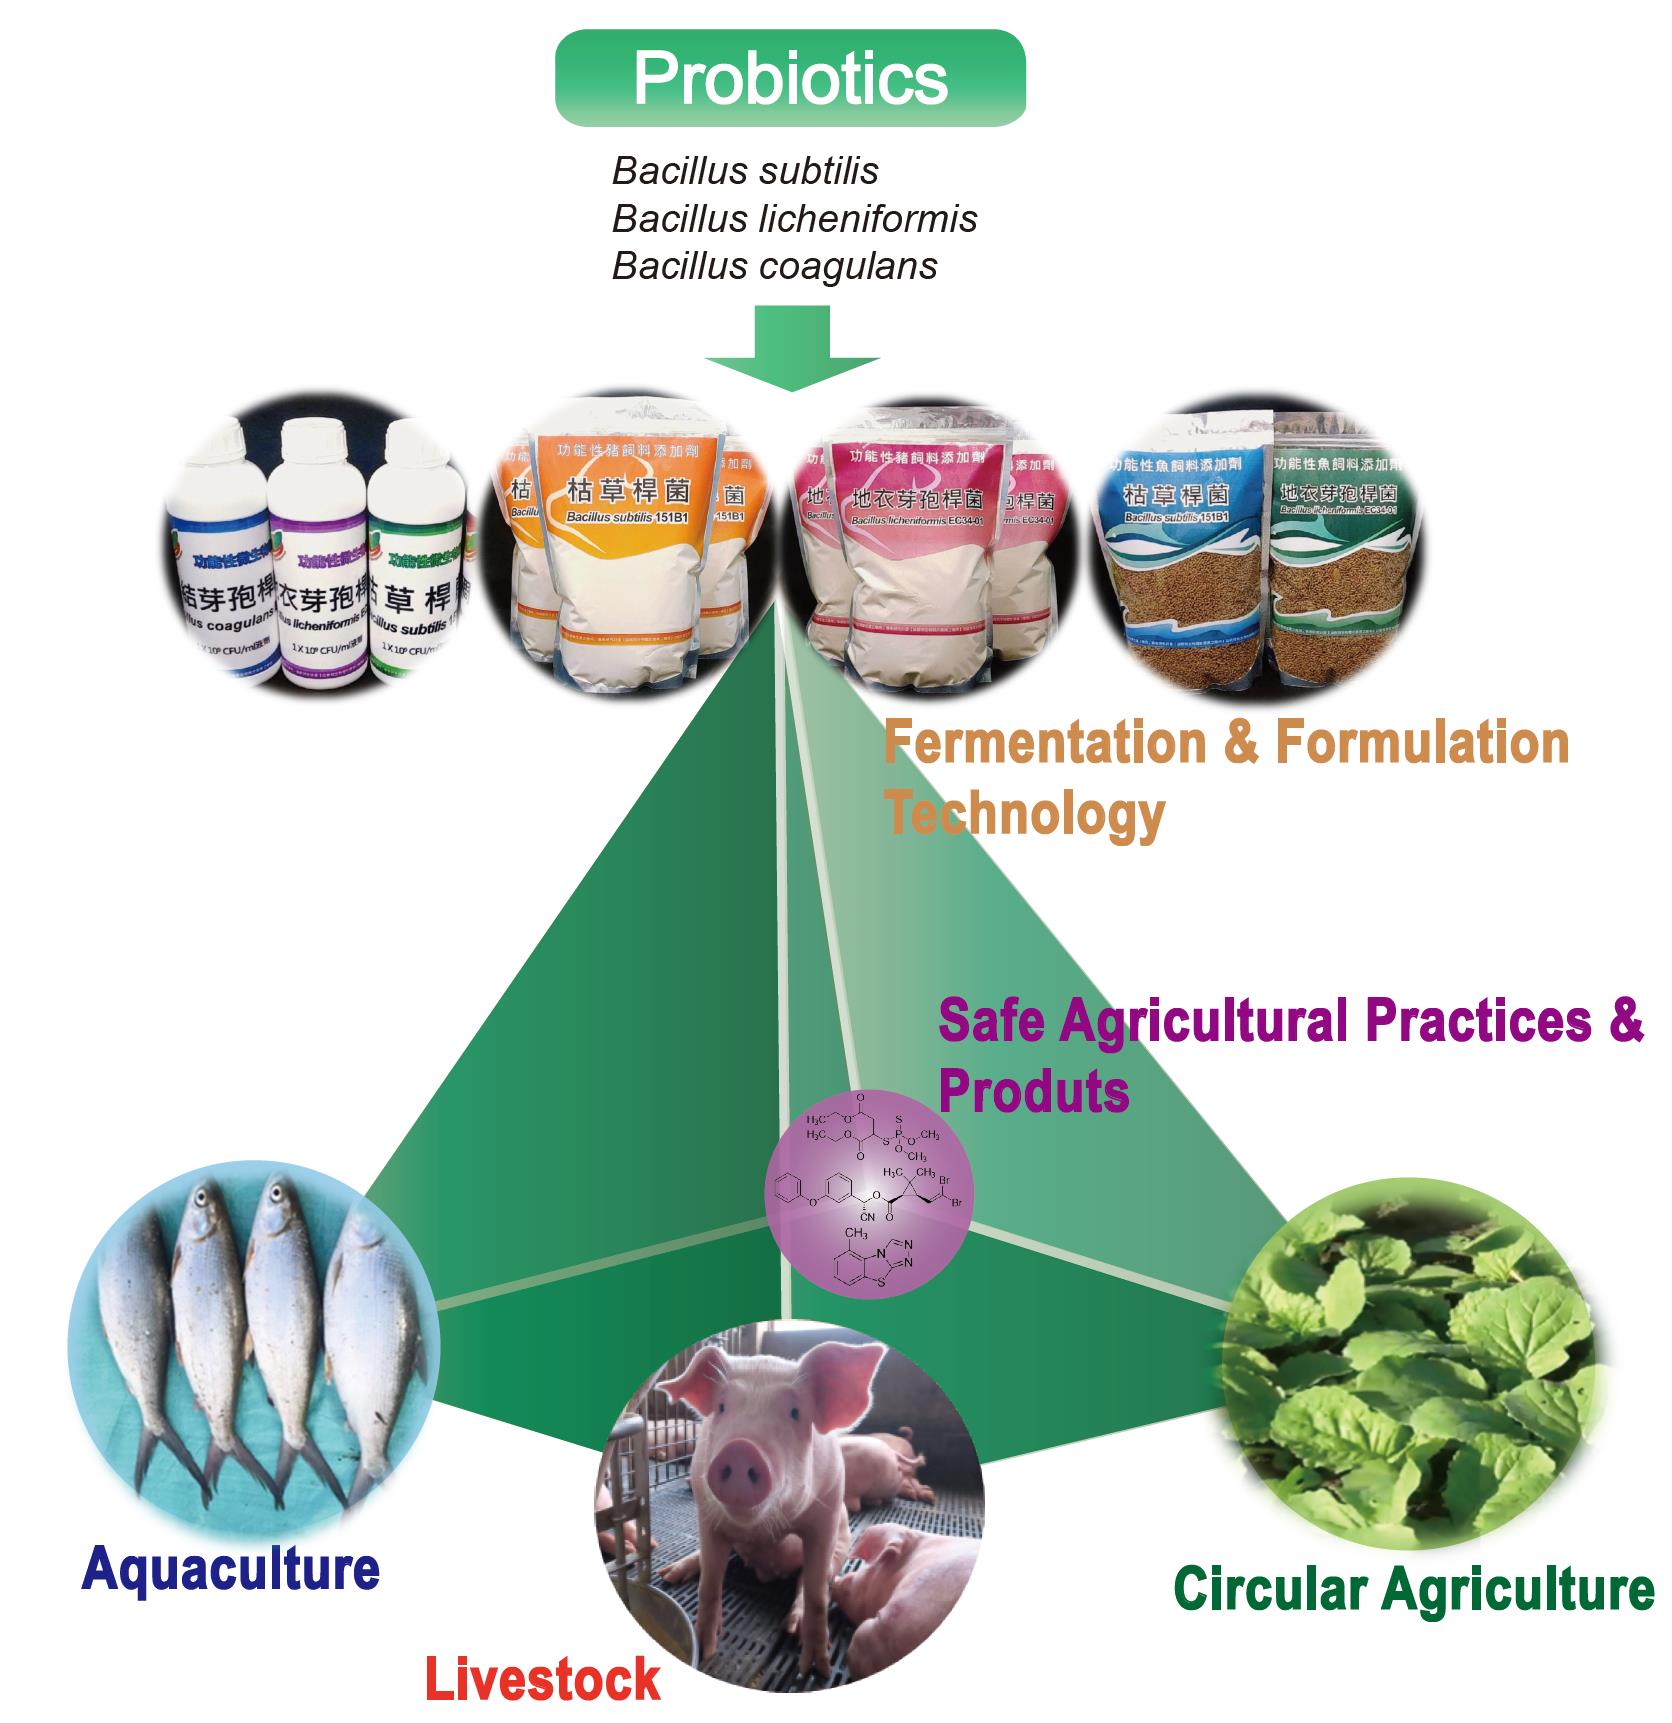 Fig. 1 The transdisciplinary team from the Department of Plant Pathology, the Pesticide Residue Analysis Center at National Chung Hsing University, and the Agricultural Technology Research Institute jointly discover multi-industries application potential of three Bacillus probiotics. They established a standard protocol of the fermentation and formulation technology using the pilot plant and industrial scale facilities and provided application technology in crop health care, circular agriculture, livestock and aquaculture.